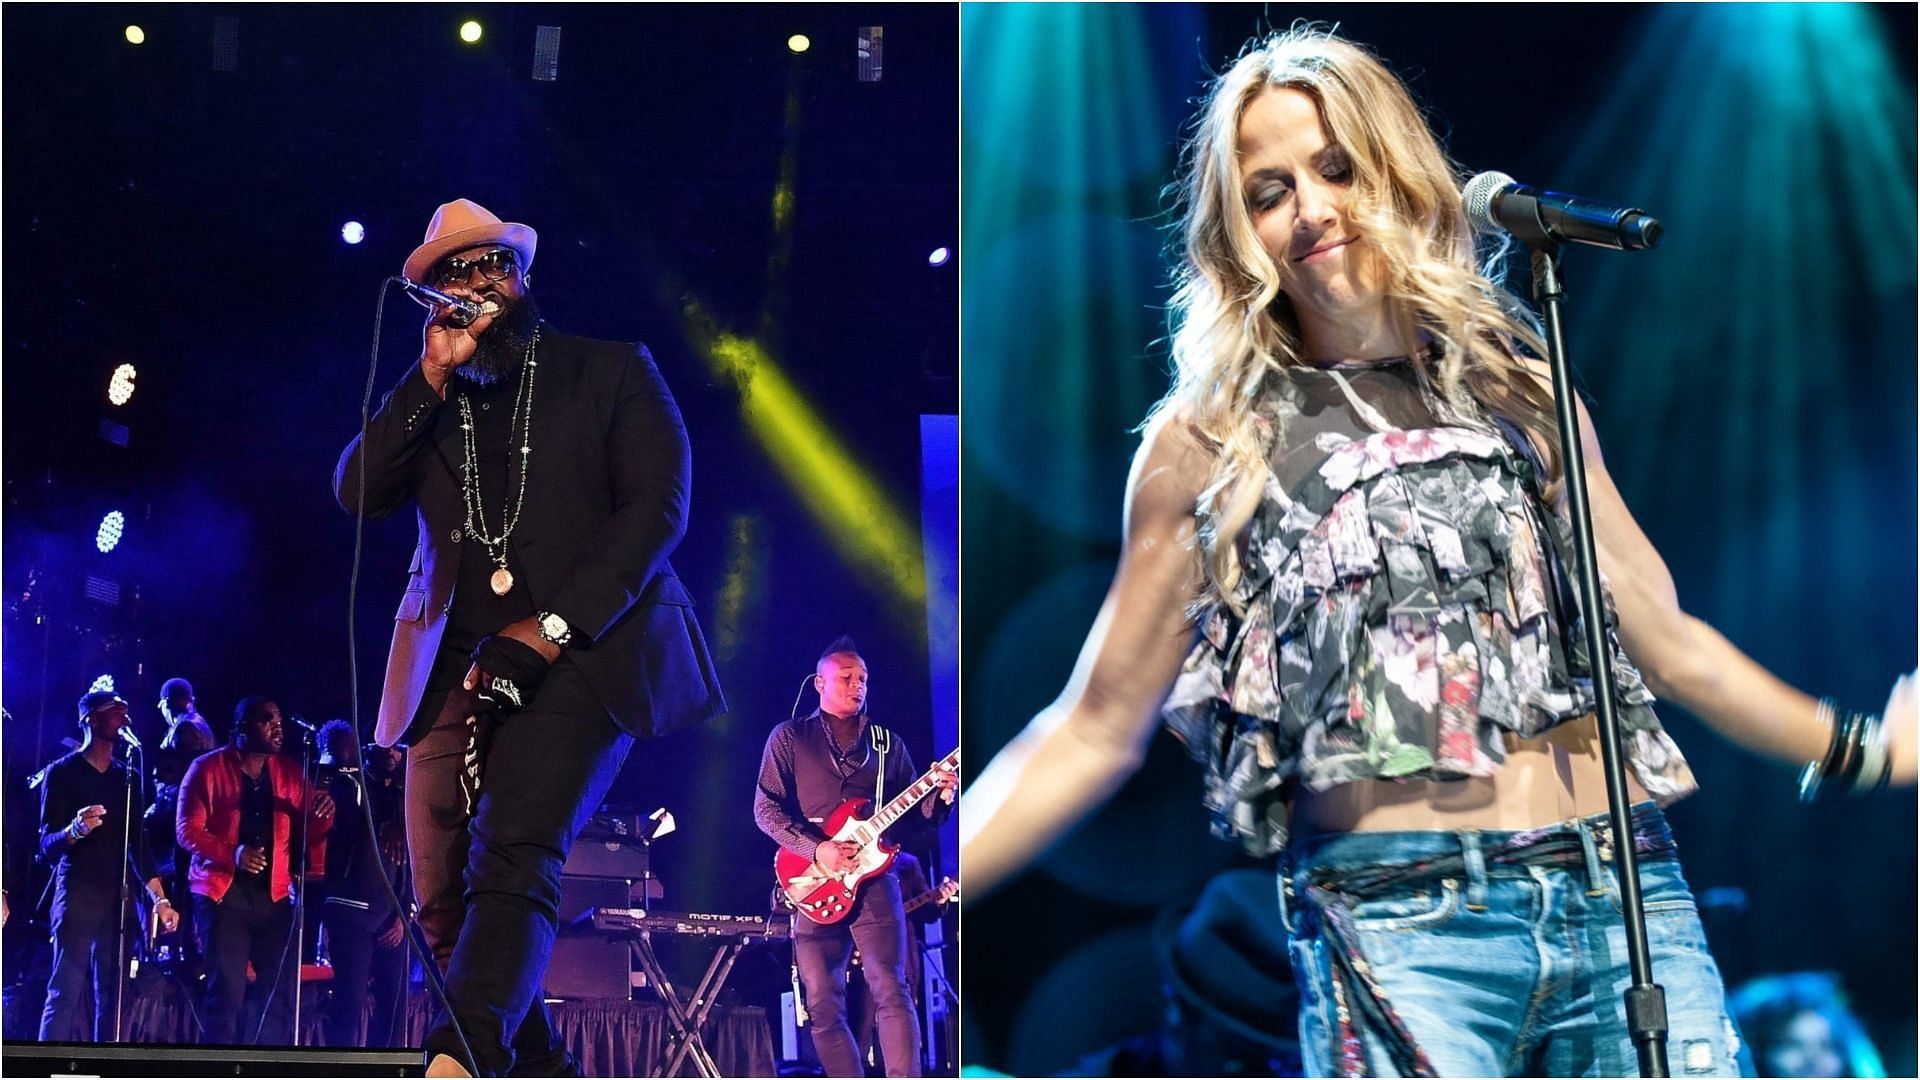 The Roots and Sheryl Crow are among the headliners at The Big Climate Thing. (Images via Getty and Facebook)